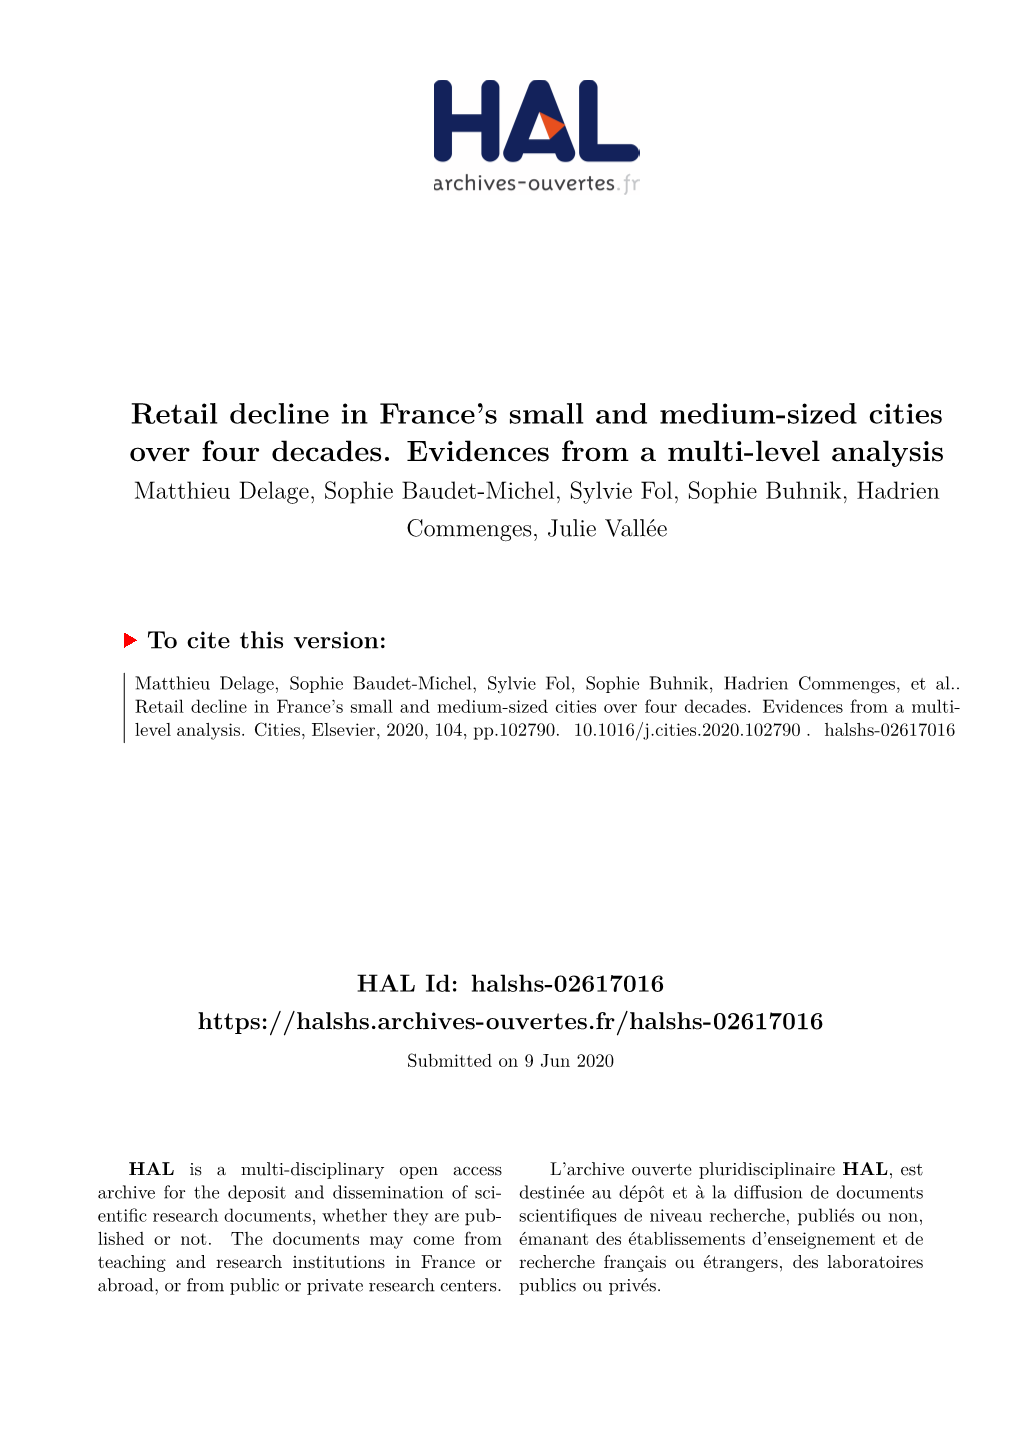 Retail Decline in France's Small and Medium-Sized Cities Over Four Decades. Evidences from a Multi-Level Analysis